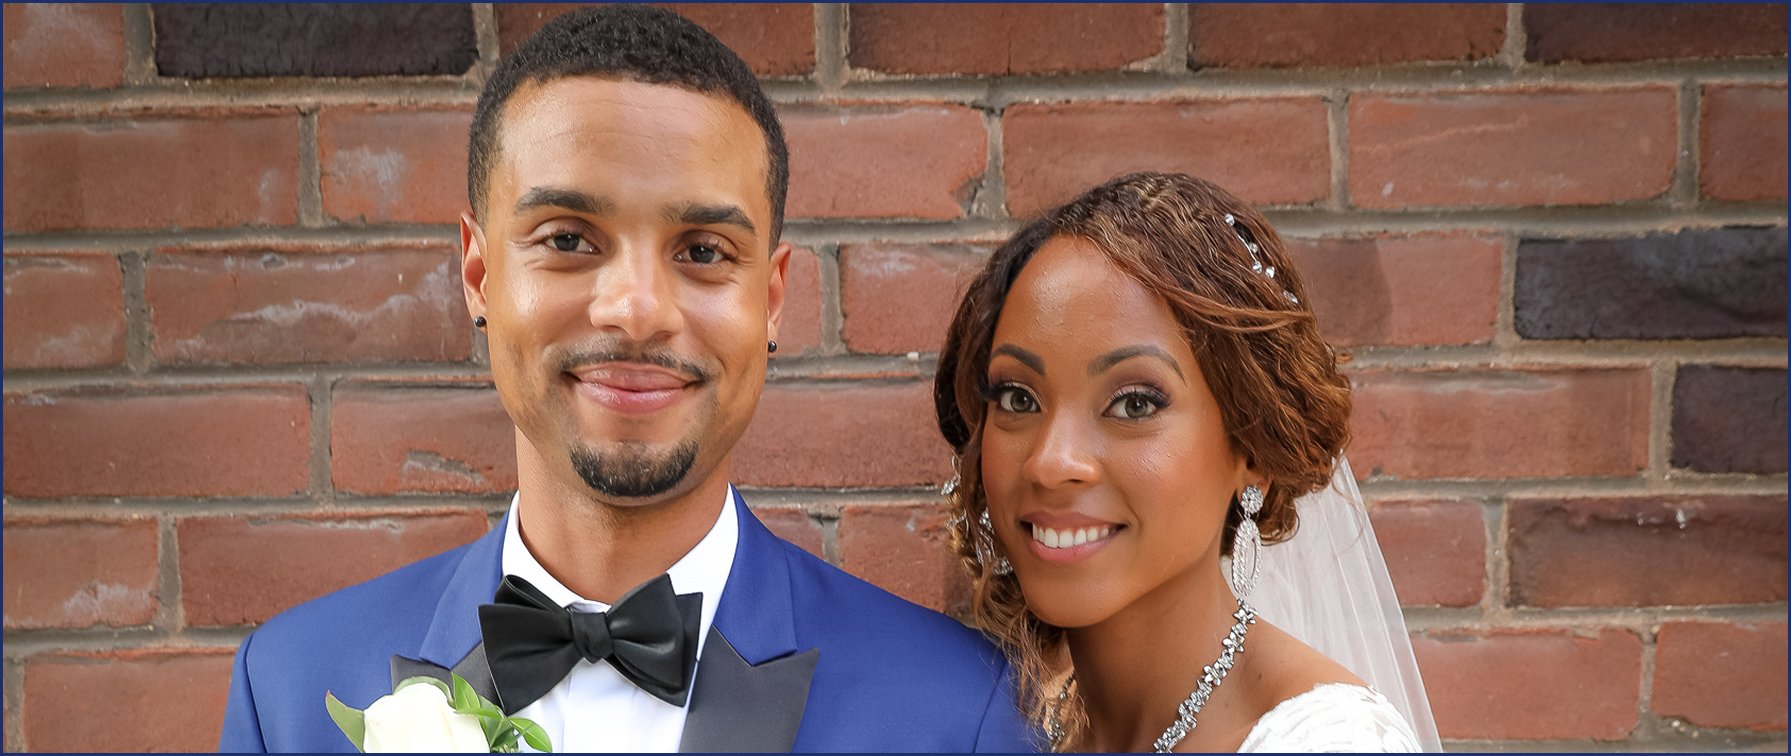 Know 'Married at First Sight' Season 10: Who stayed together and broke up?